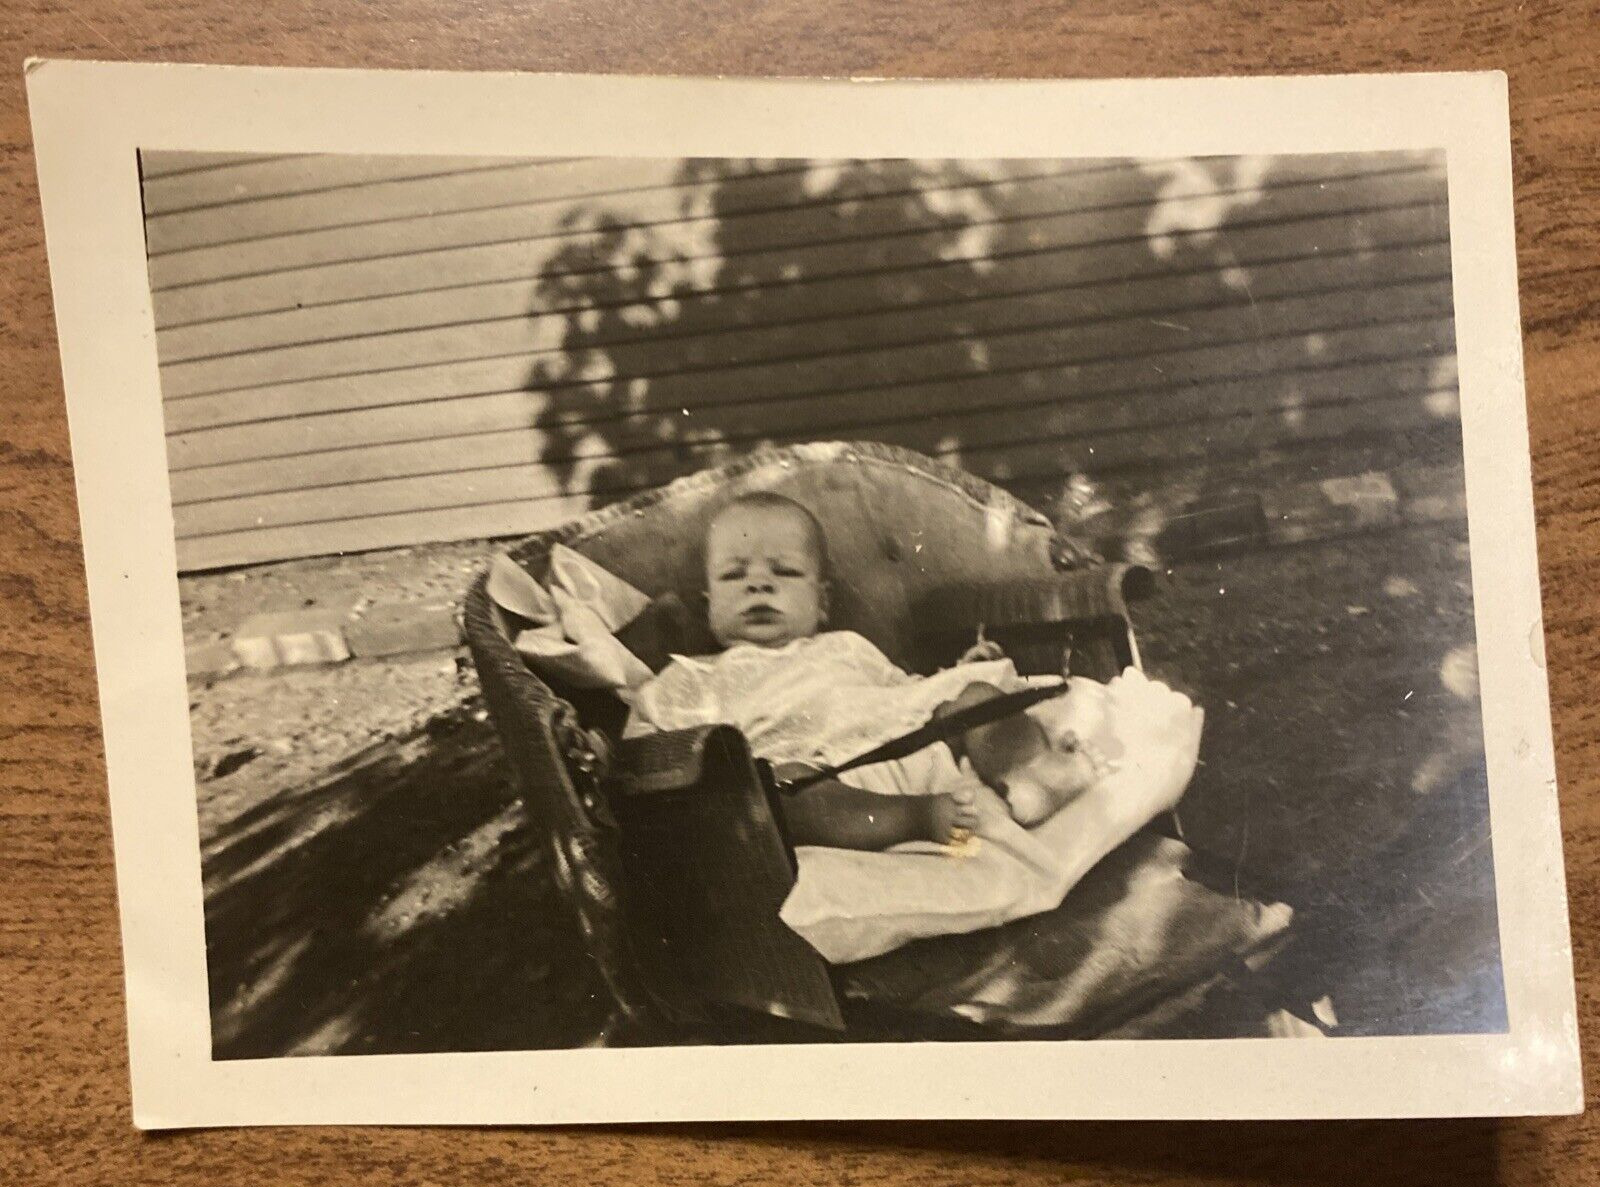 Vintage 1920s Baby Toddler Child Infant in Carriage Chair Real Photograph P3f16